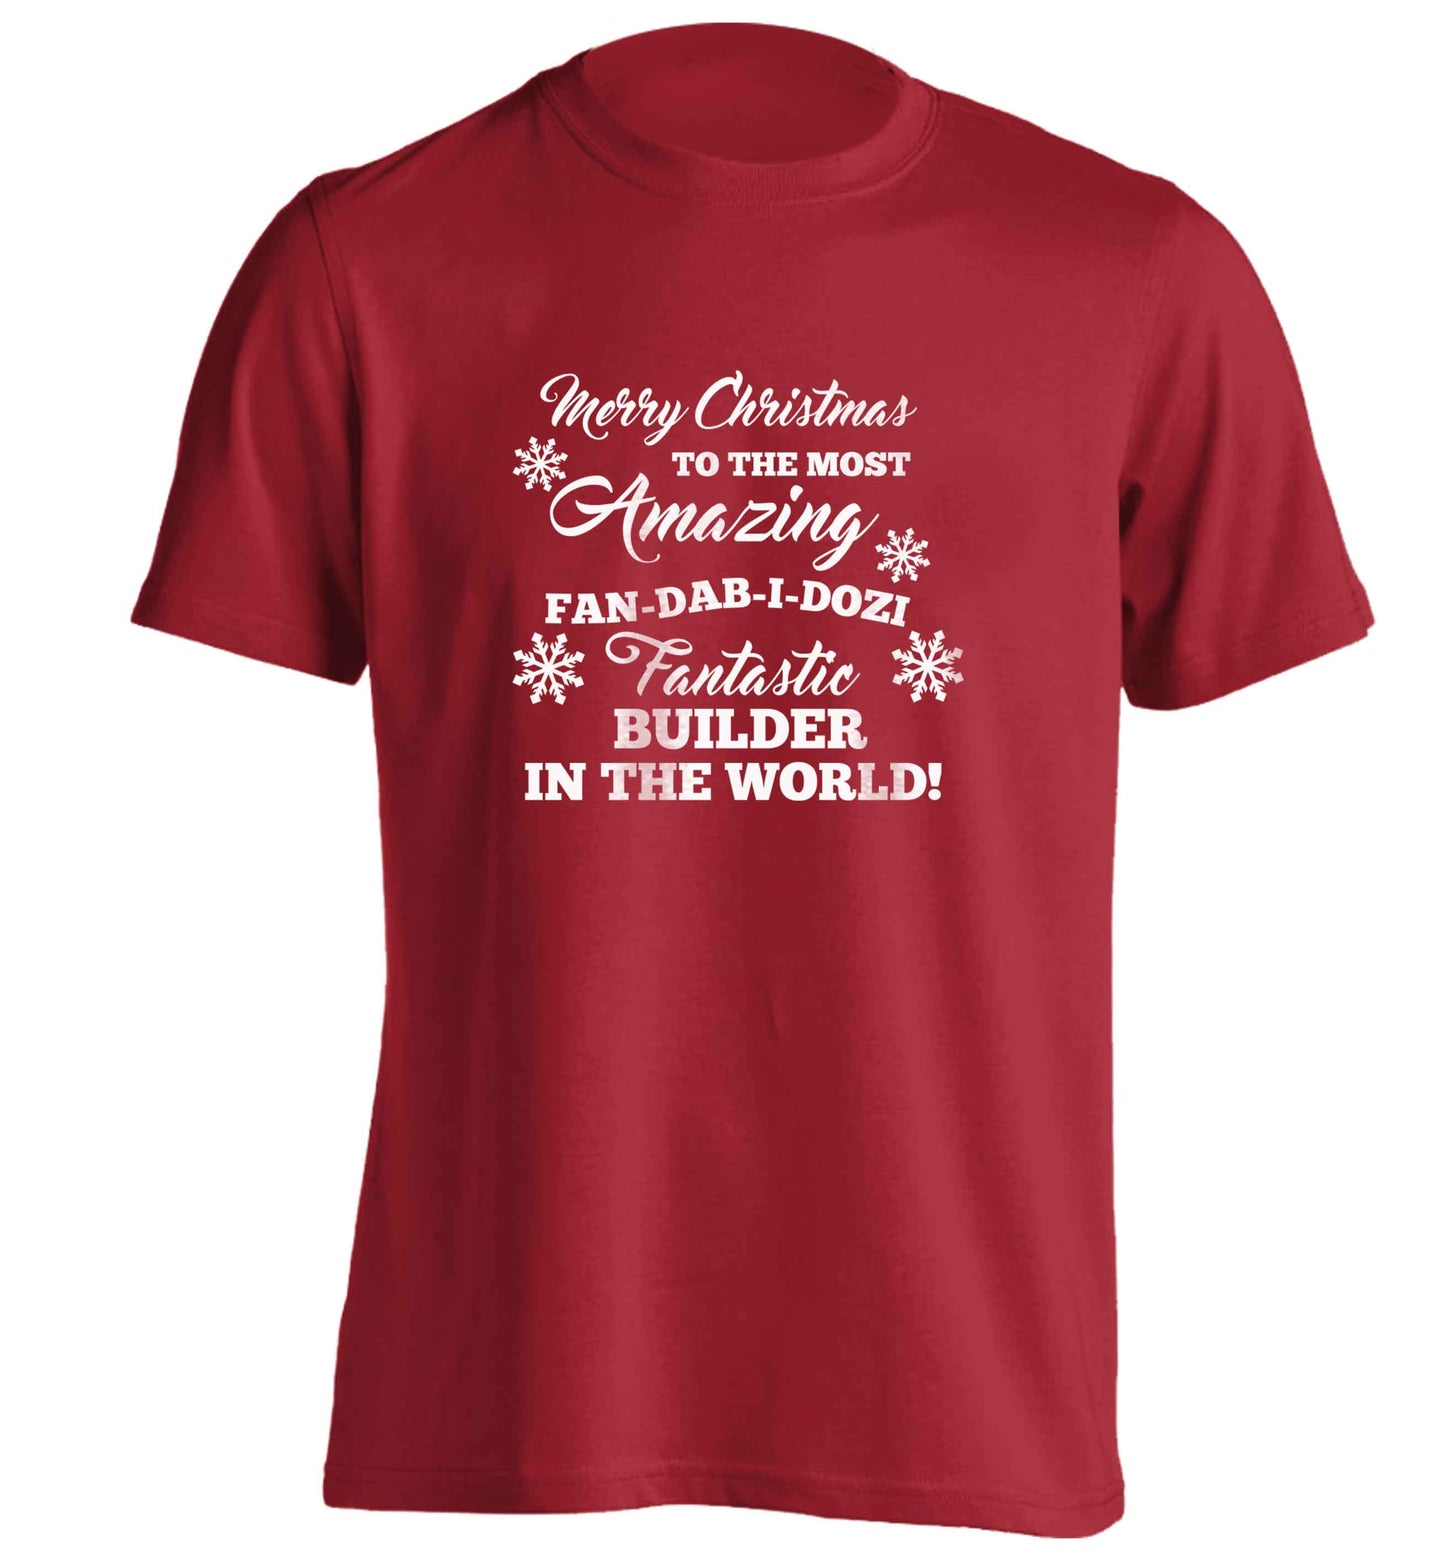 Merry Christmas to the most amazing builder in the world! adults unisex red Tshirt 2XL